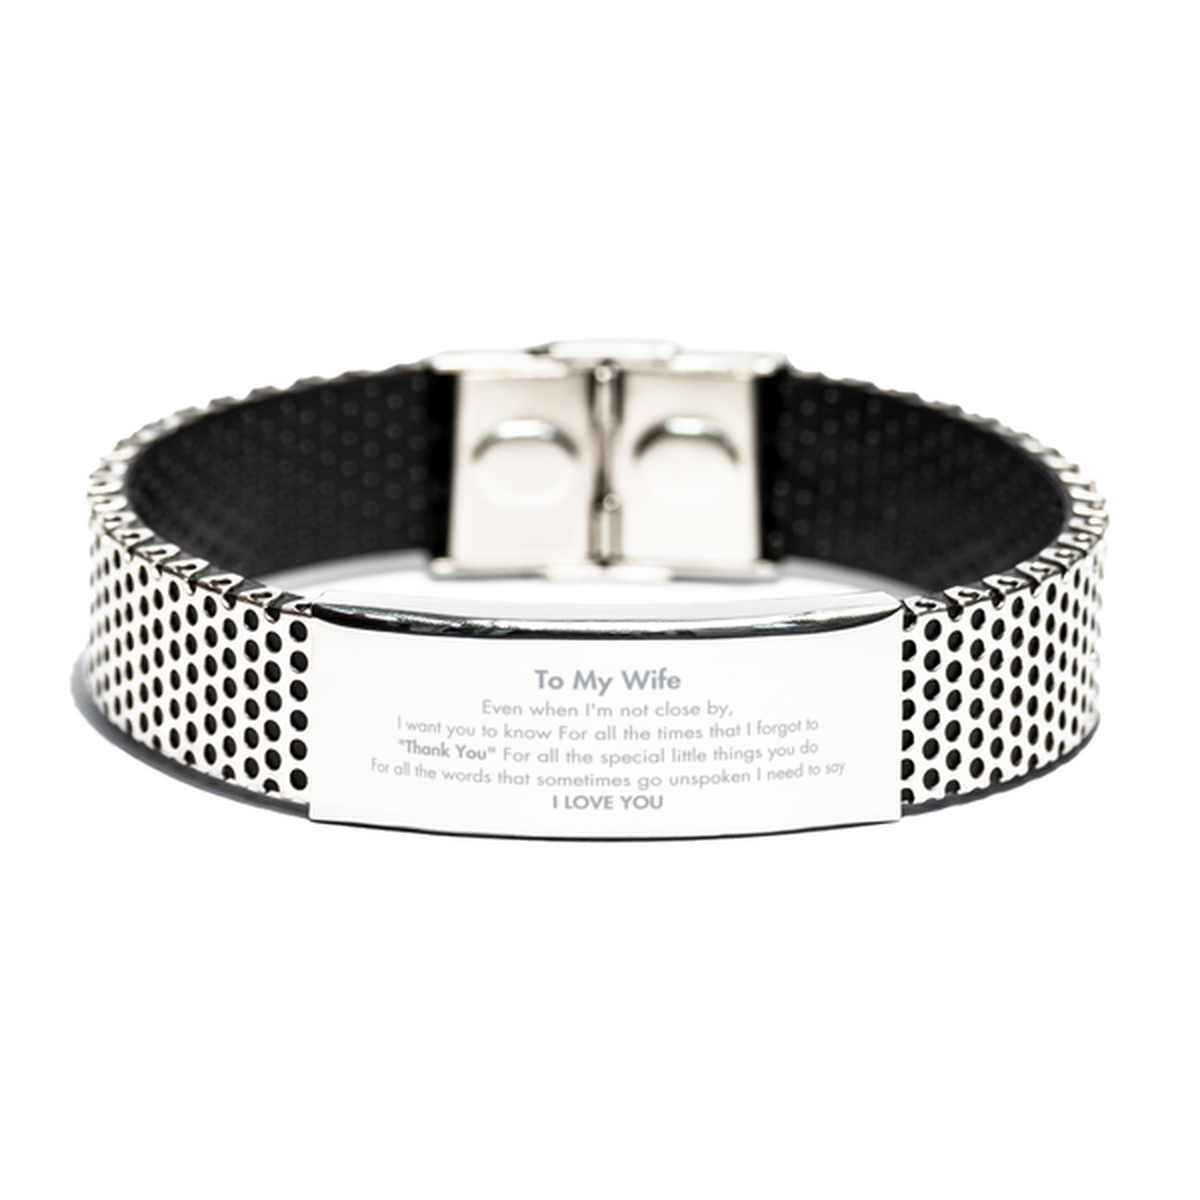 Thank You Gifts for Wife, Keepsake Stainless Steel Bracelet Gifts for Wife Birthday Mother's day Father's Day Wife For all the words That sometimes go unspoken I need to say I LOVE YOU